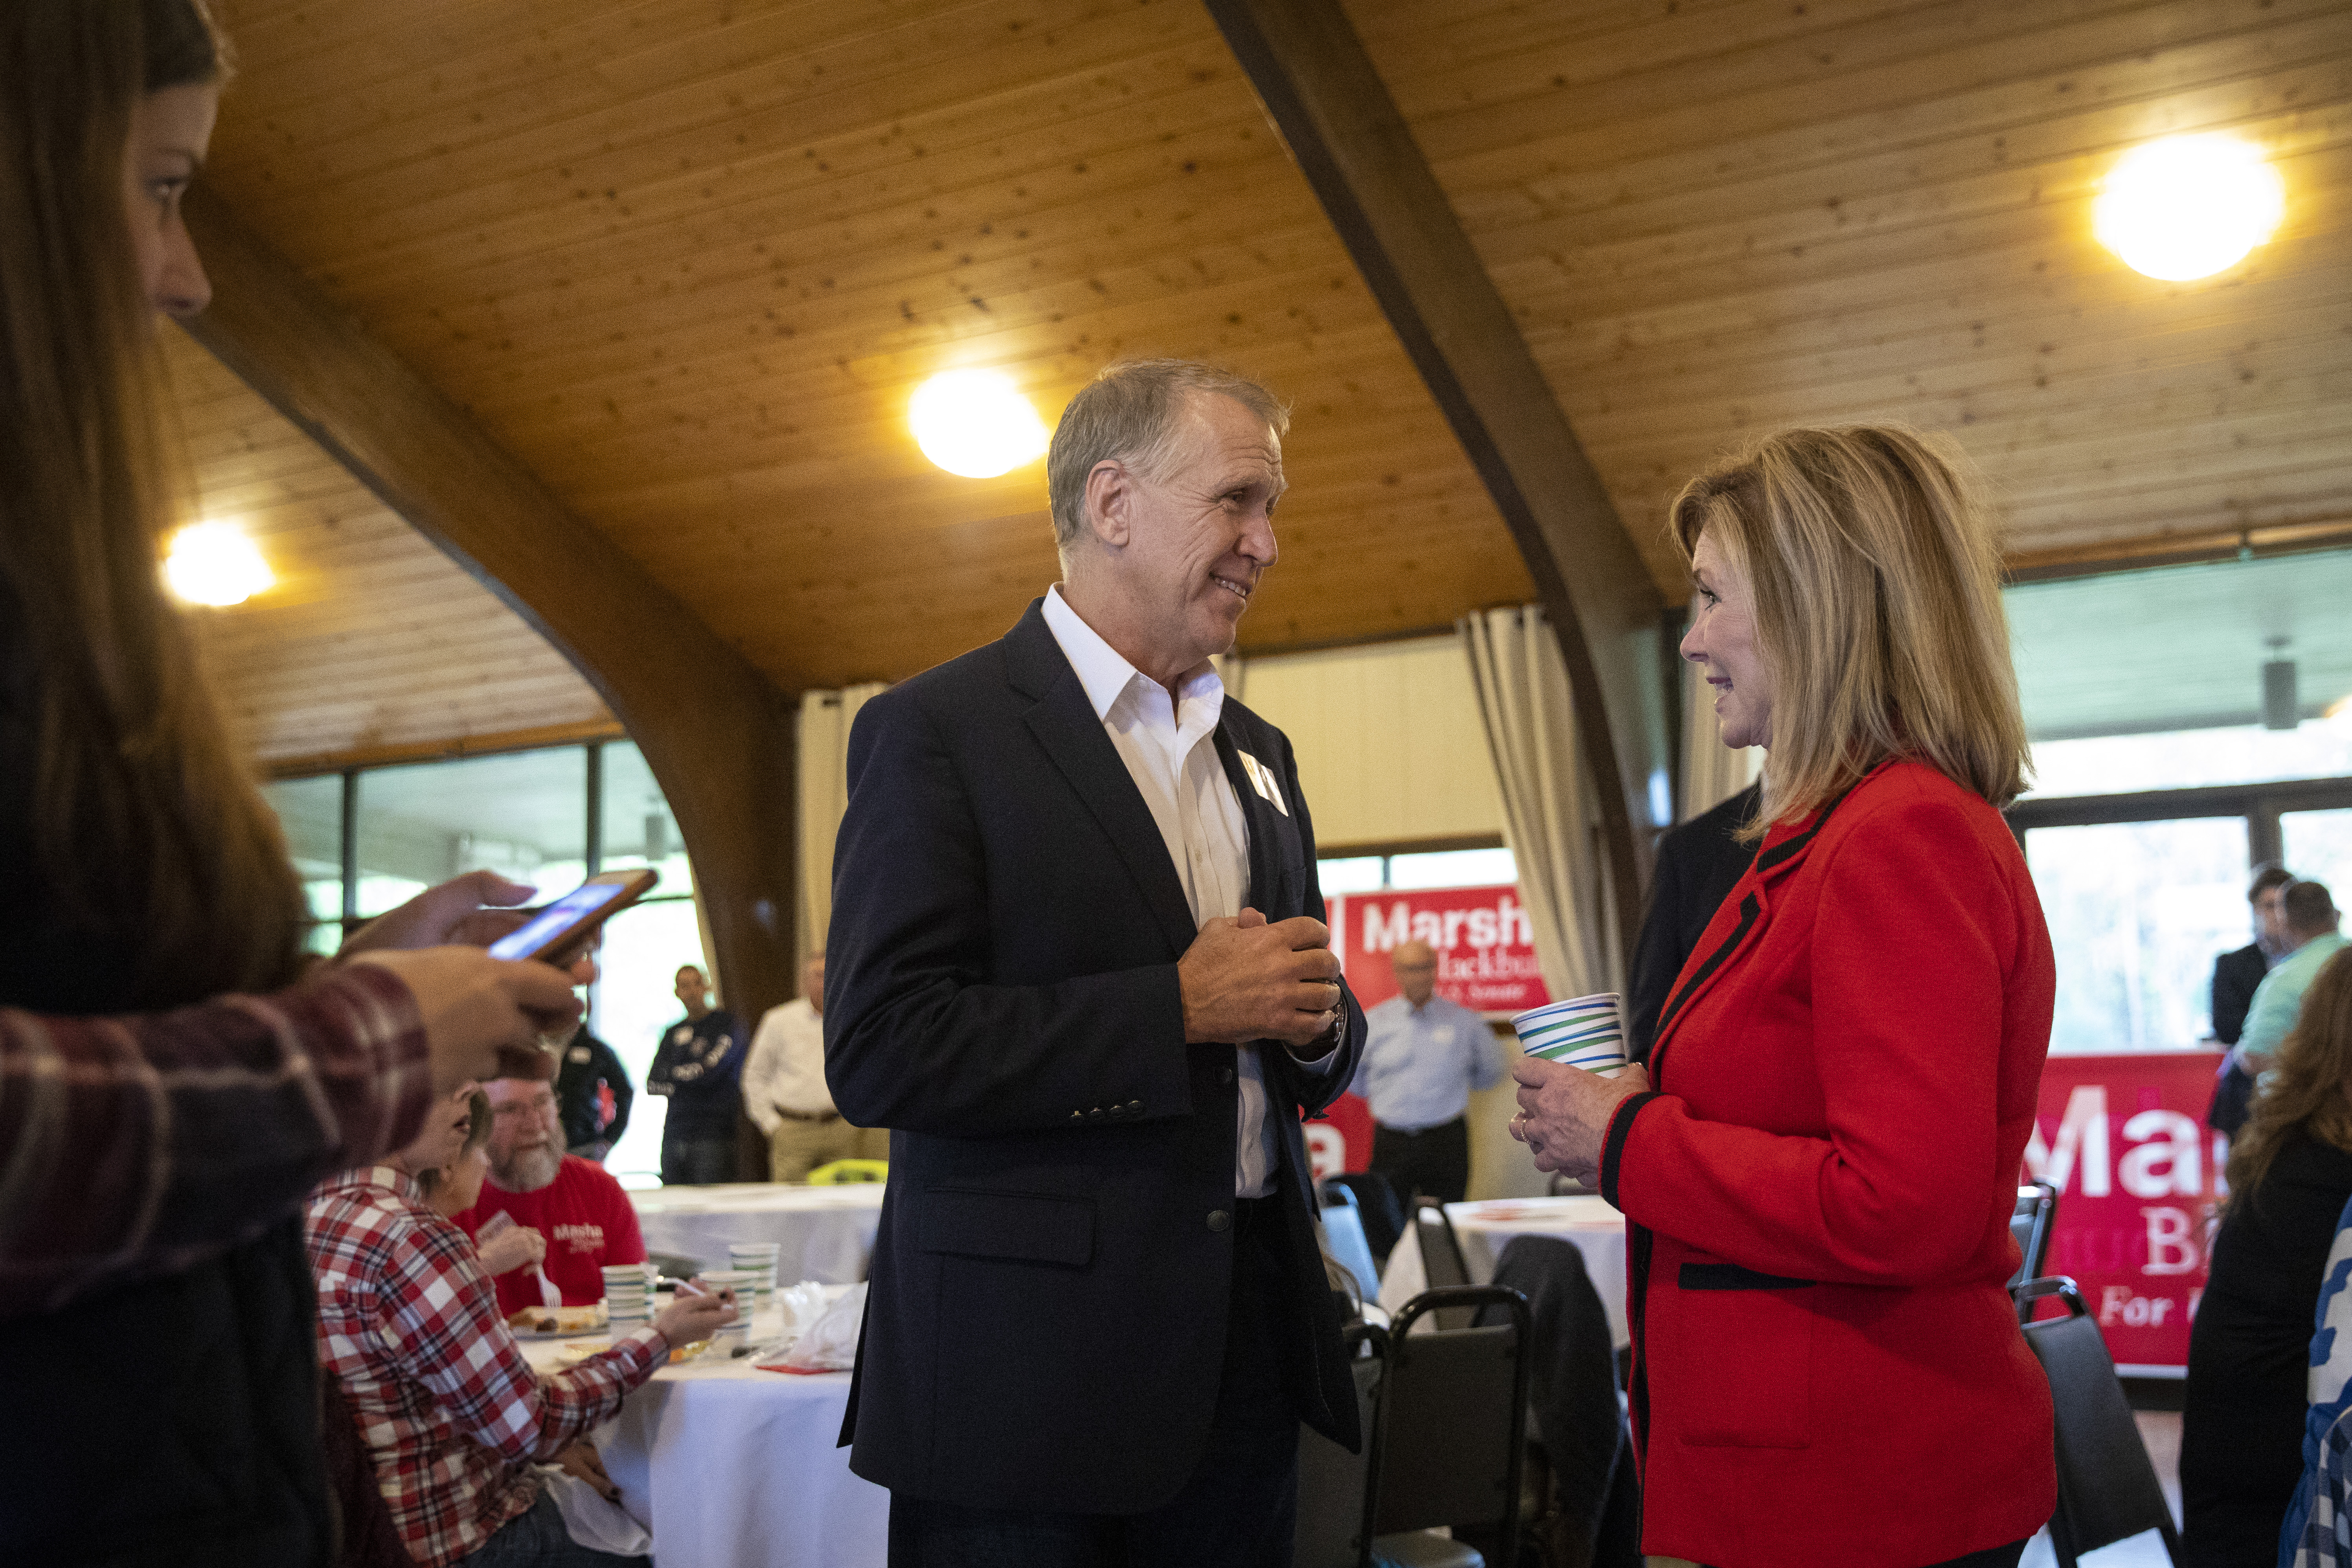 CHAPEL HILL, TN - NOVEMBER 1: (L-R) Sen. Tom Tillis (R-NC) talks with U.S. Rep. Marsha Blackburn (R-TN), Republican candidate for U.S. Senate, during a get-out-the-vote rally at Henry Horton State Park, November 1, 2018 in Chapel Hill, Tennessee. Blackburn, who represents Tennessee's 7th Congressional district in the U.S. House, is running in a tight race against Democratic candidate Phil Bredesen, a former governor of Tennessee. The two are competing to fill the Senate seat left open by Sen. Bob Corker (R-TN), who opted to not seek reelection. (Photo by Drew Angerer/Getty Images)